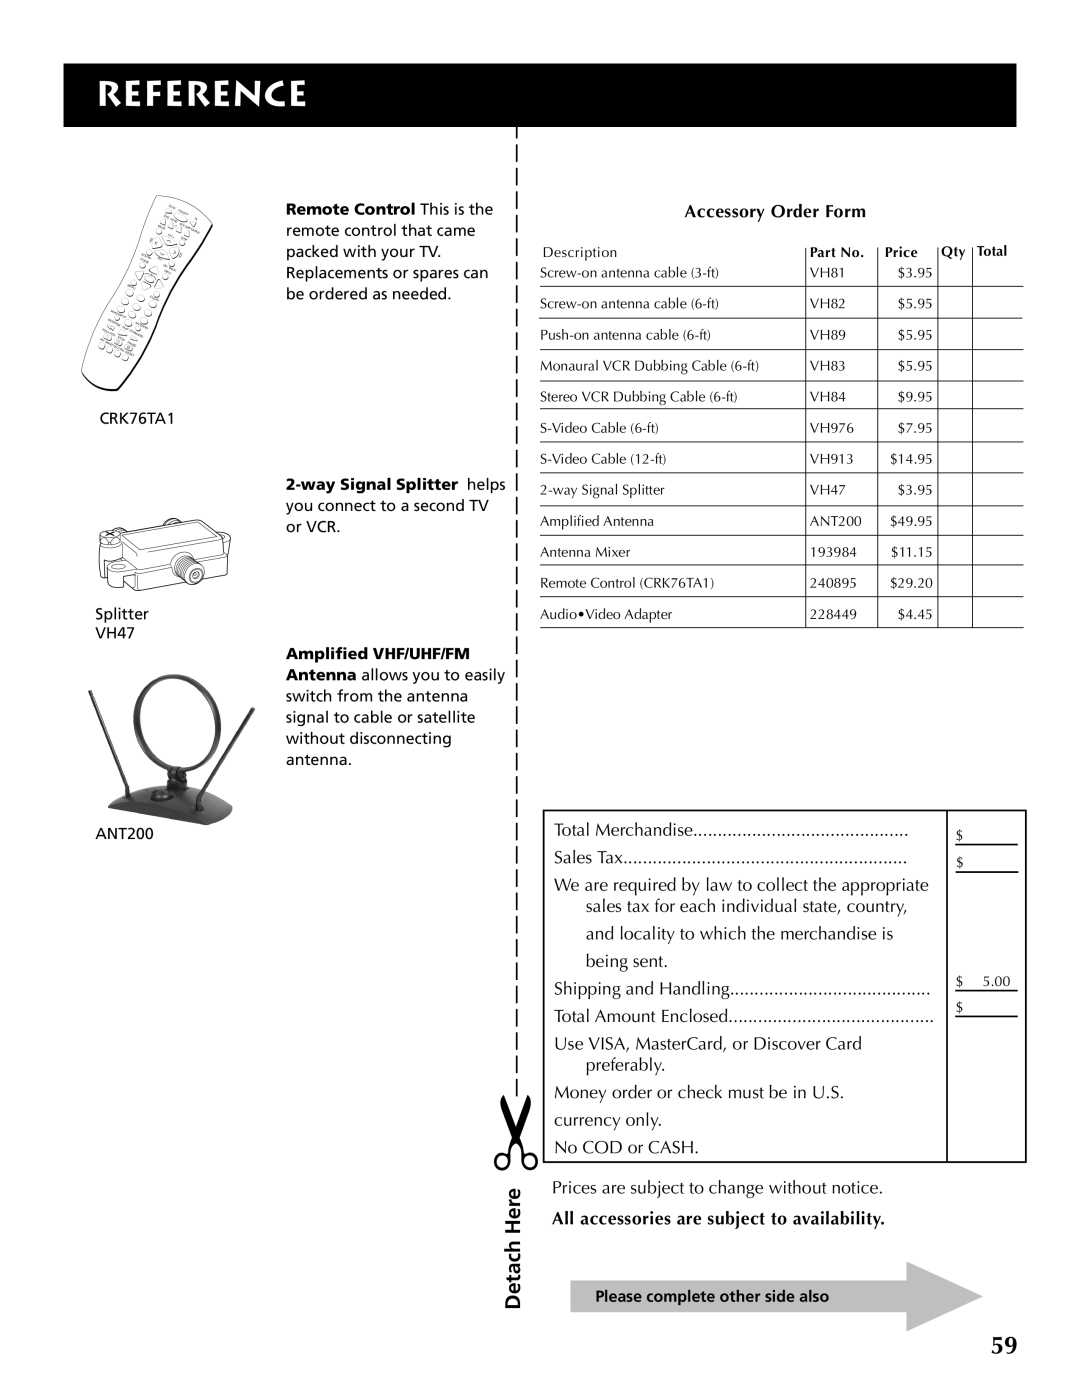 RCA F32691 manual Accessory Order Form, All accessories are subject to availability, Reference 